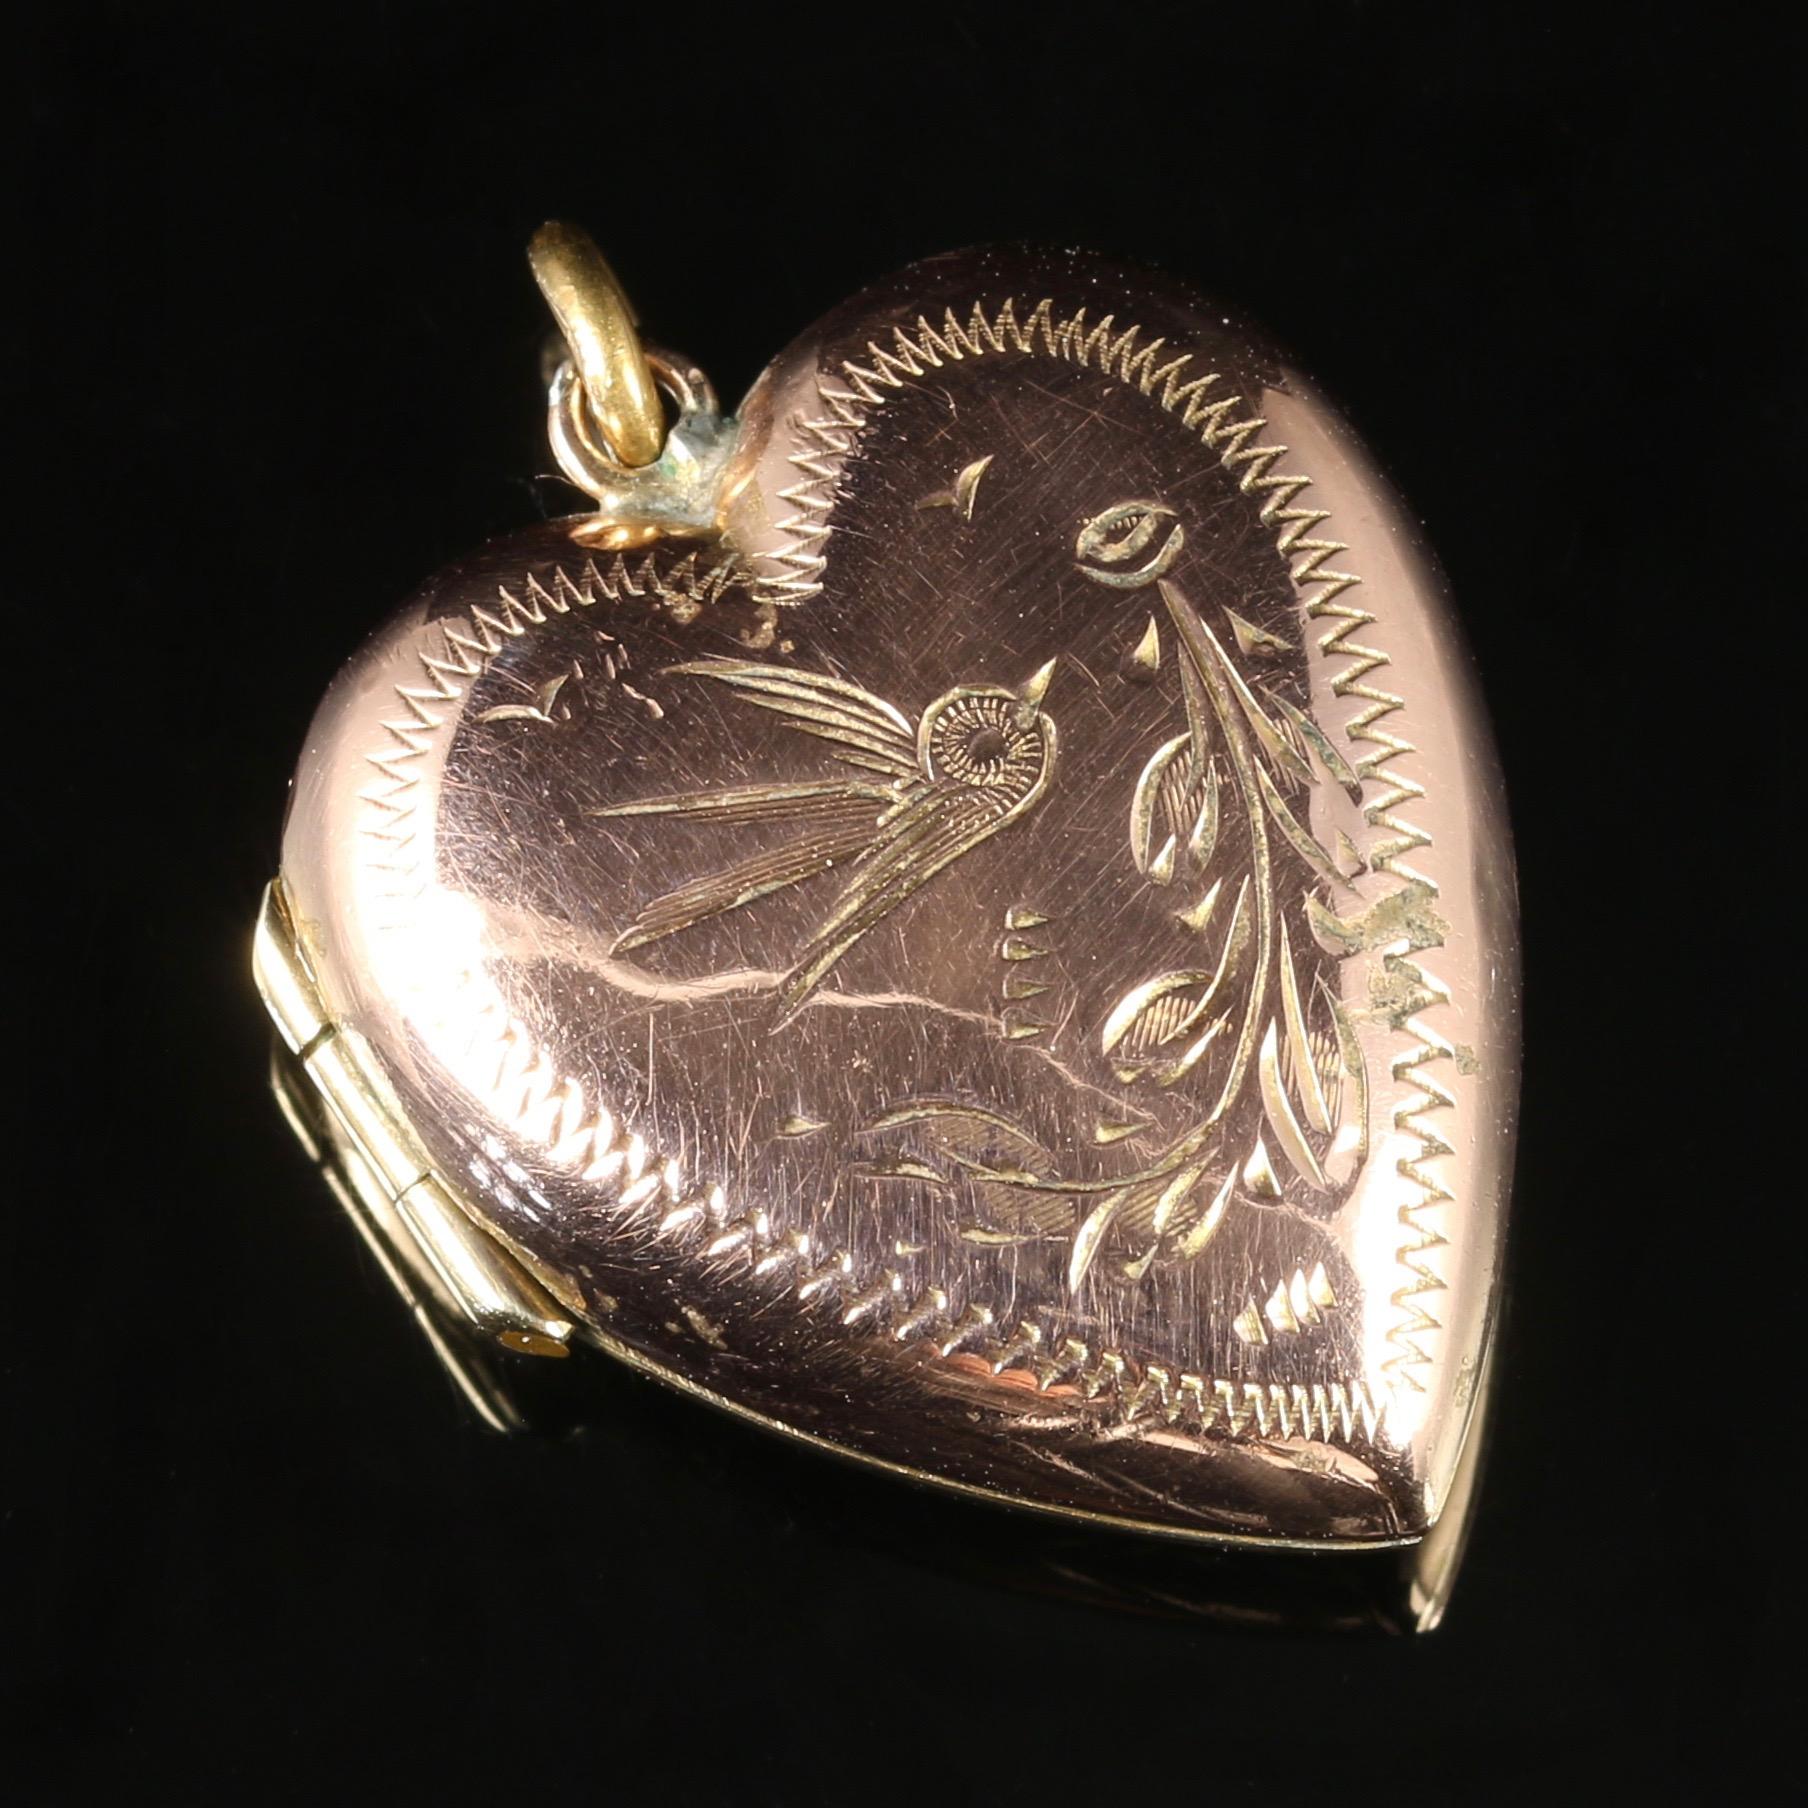 For more details please click continue reading down below...

This fabulous antique Victorian heart locket is set in 9ct Gold, Circa 1880.

The front of the locket has a Rose gold hue which has developed with age, and is beautifully engraved with